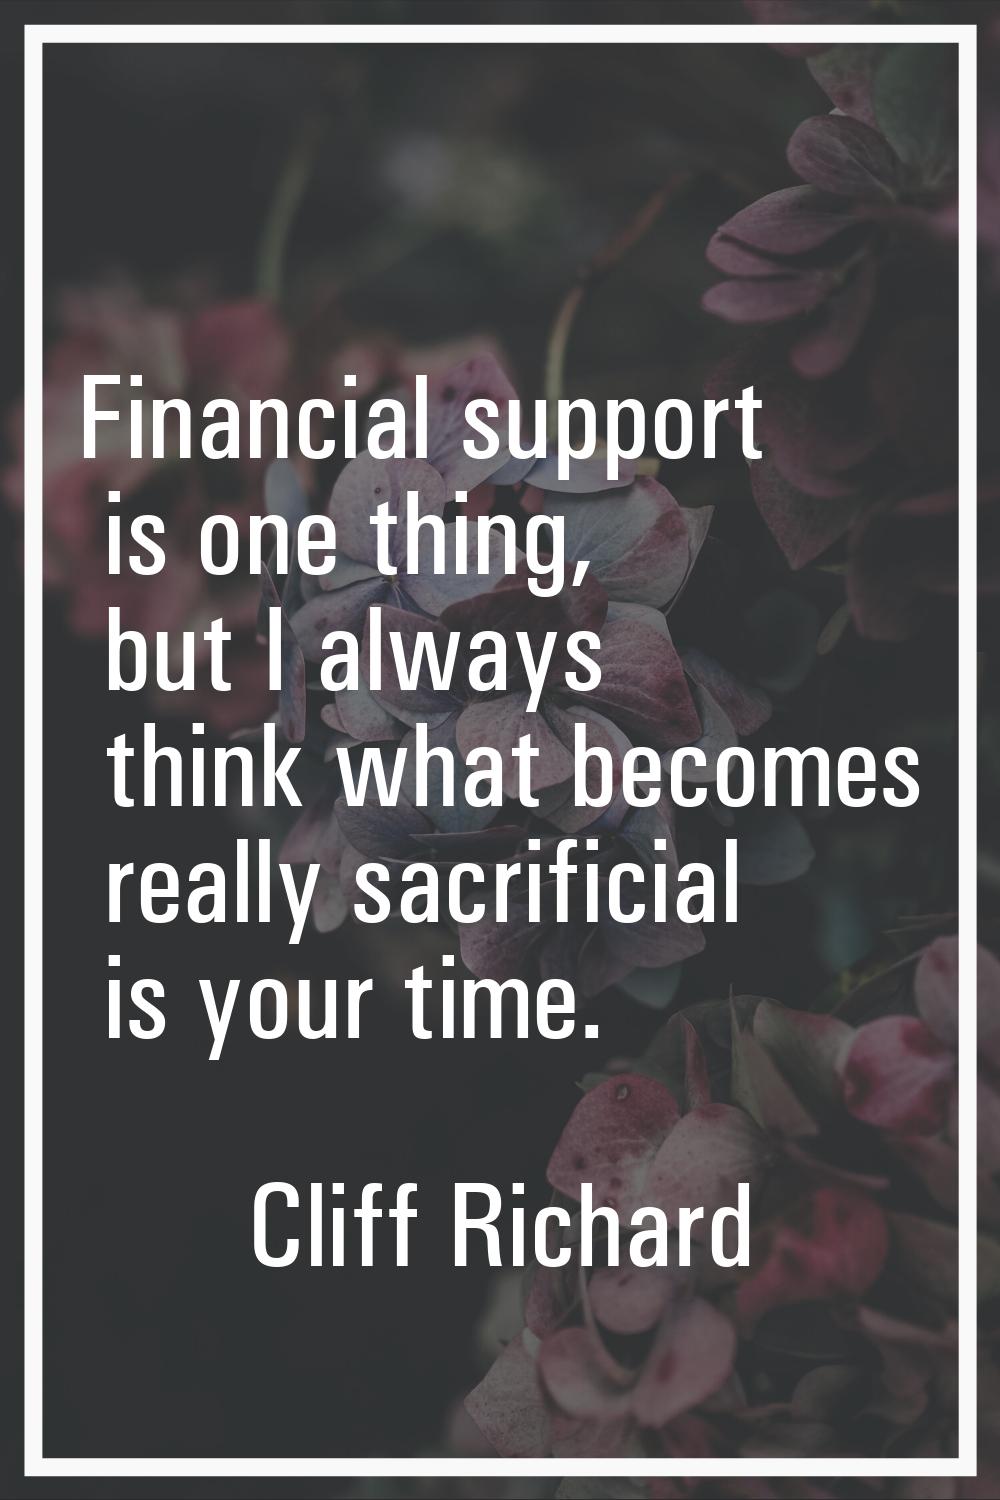 Financial support is one thing, but I always think what becomes really sacrificial is your time.